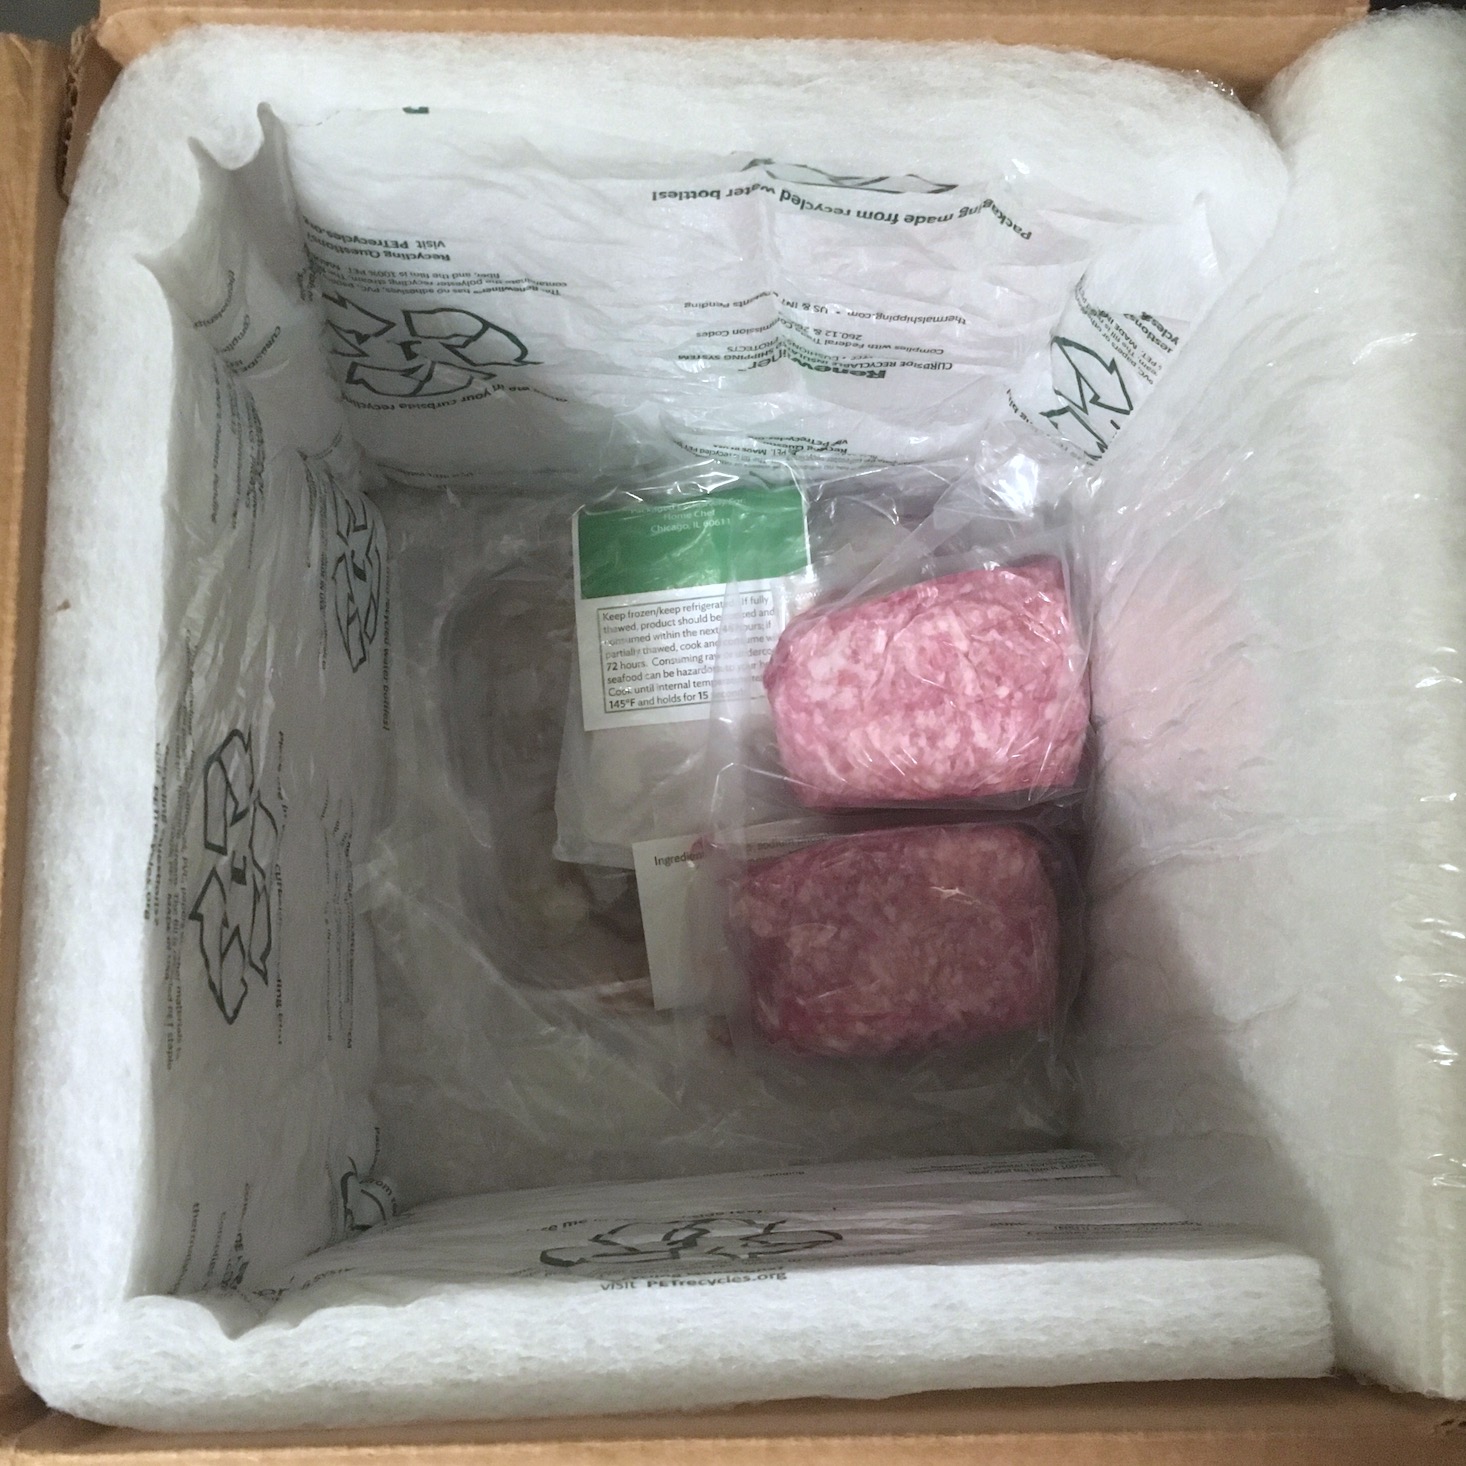 open box showing proteins and insulation